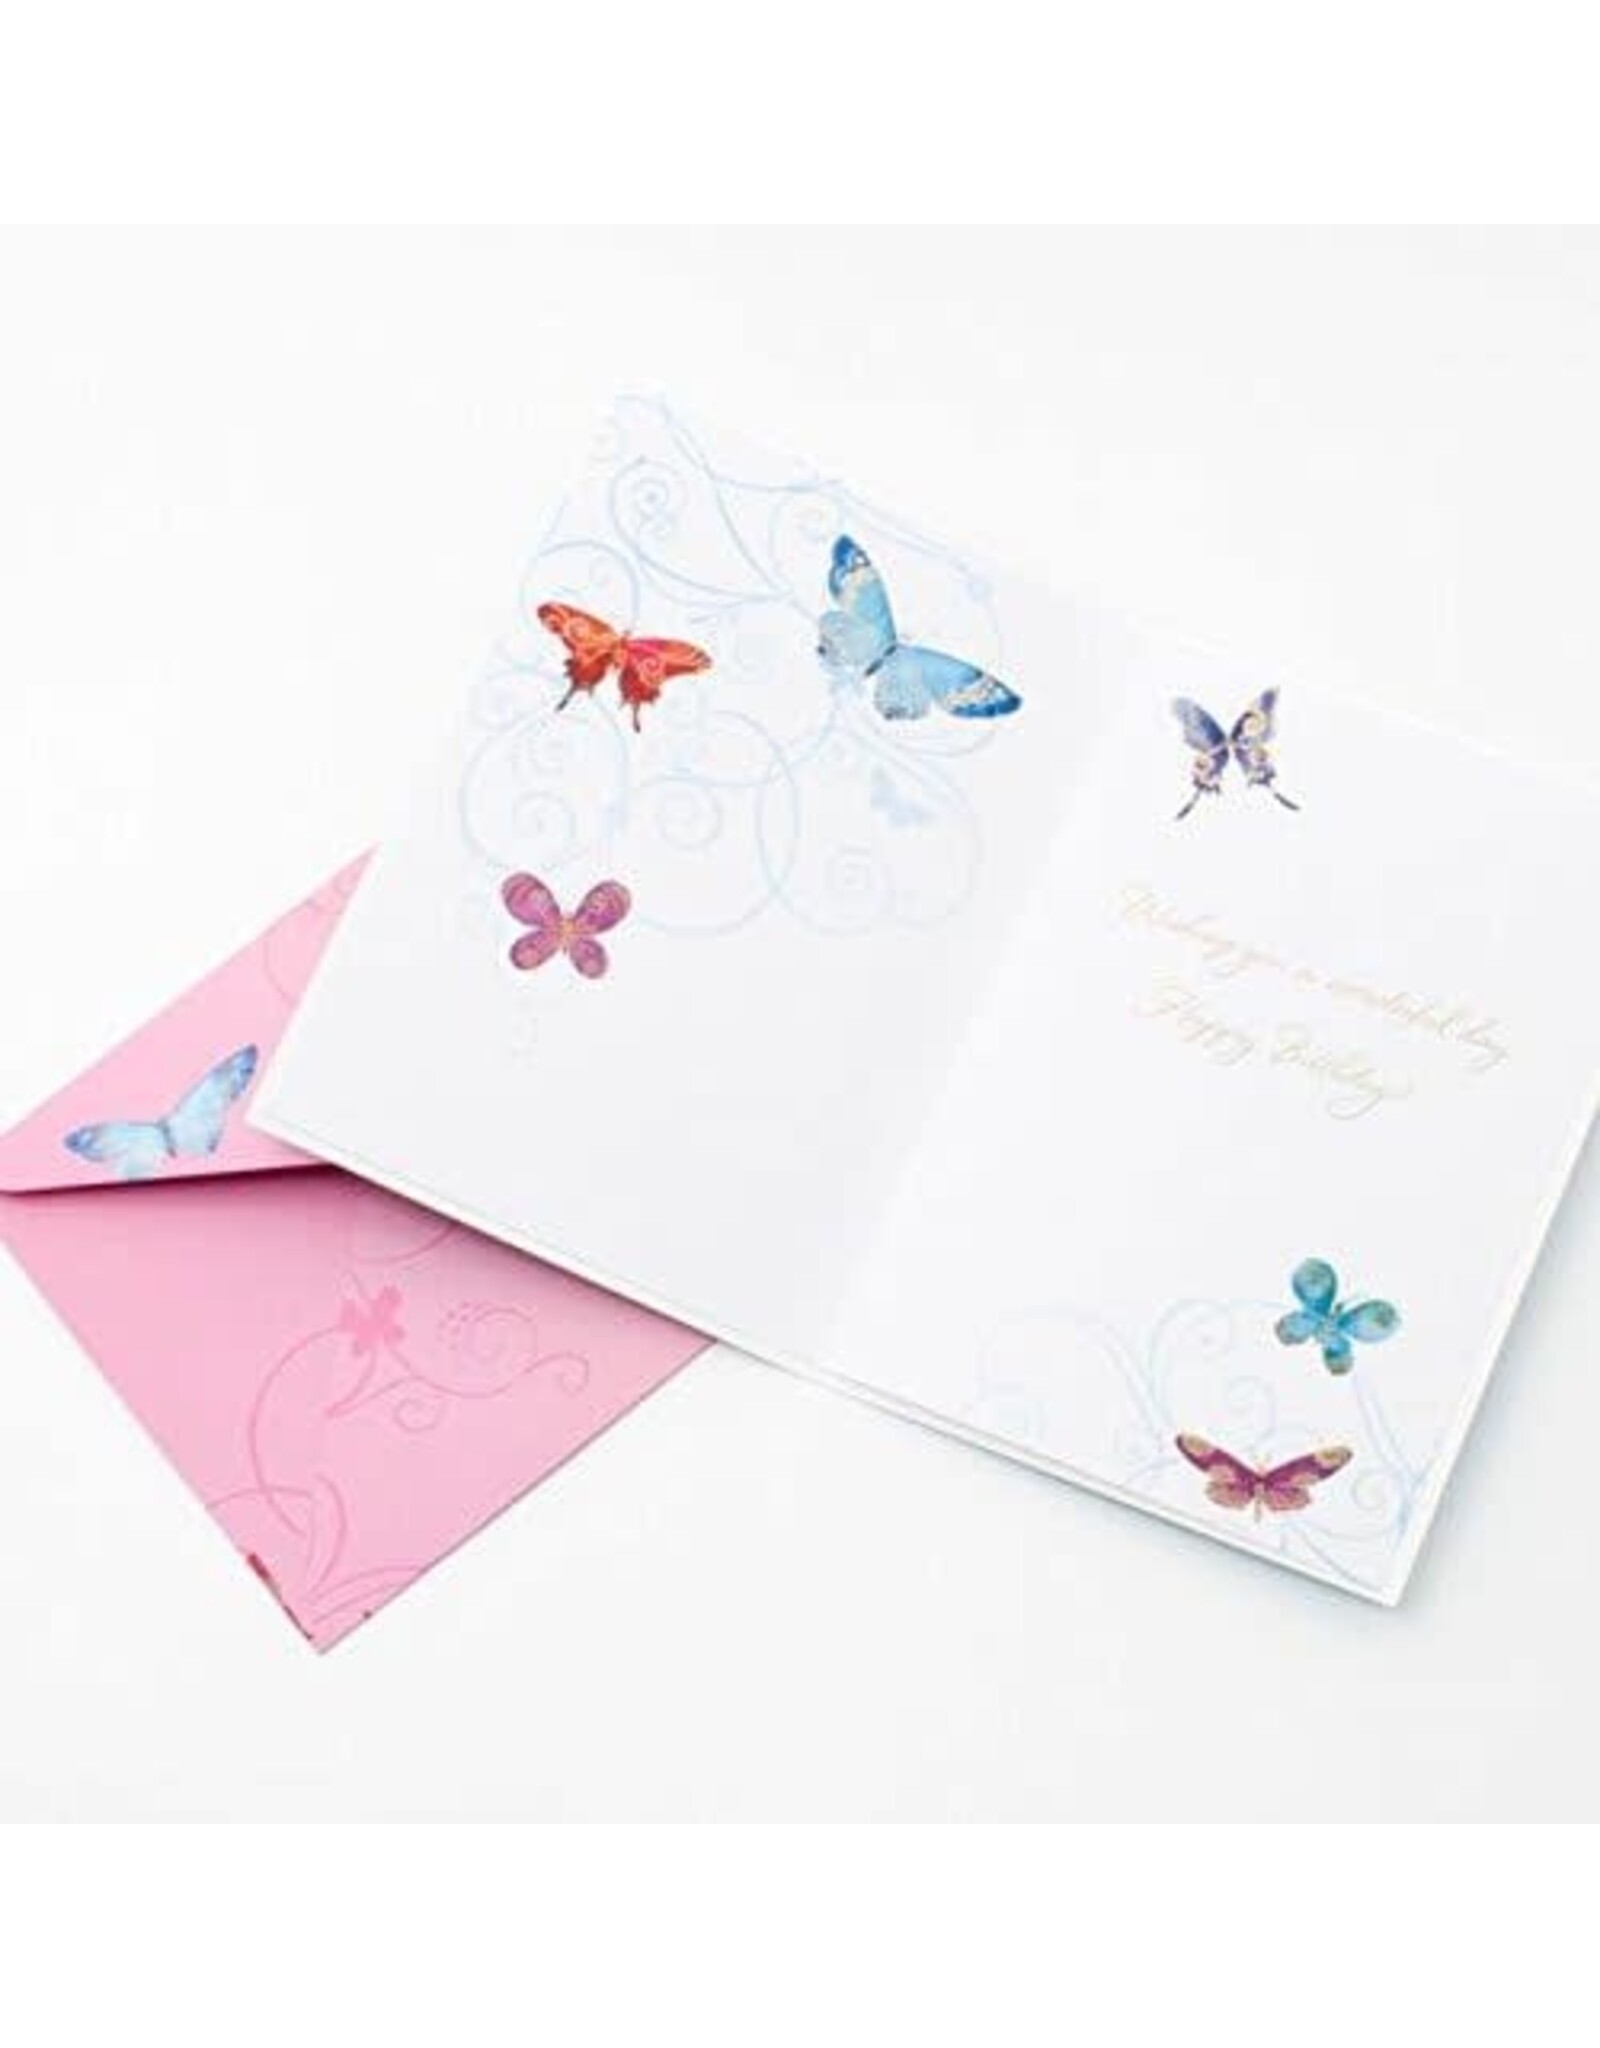 PAPYRUS® Birthday Card Butterflies in Rainbow Colors